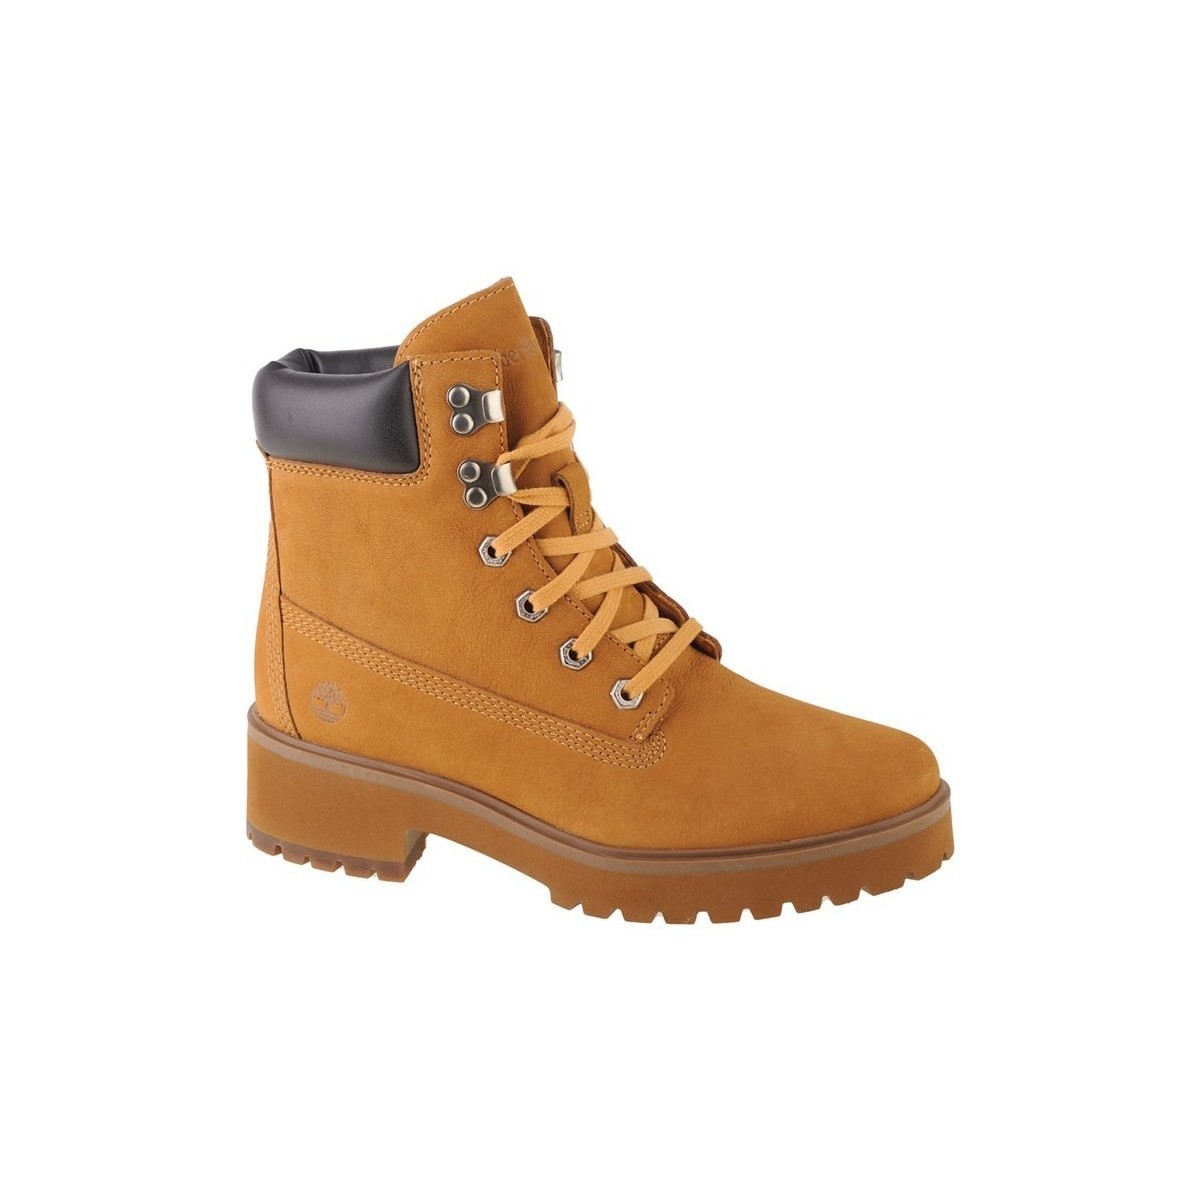 Zapatos Mujer Zapatillas altas Timberland Carnaby Cool 6 IN Boot Marrón